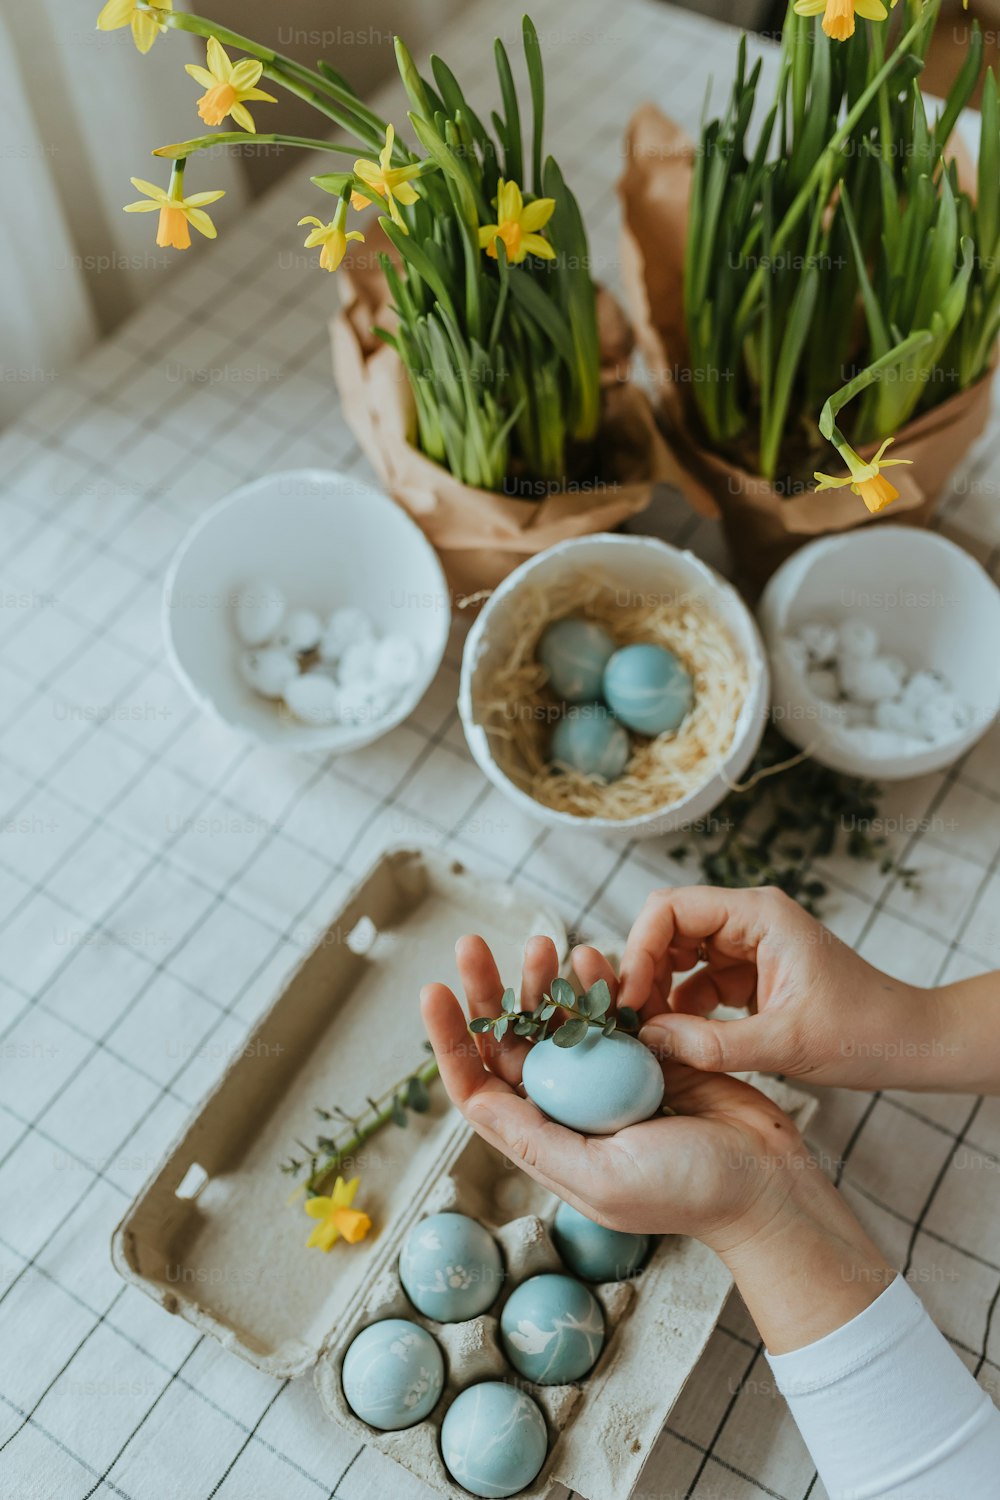 a person holding a small egg in front of some flowers